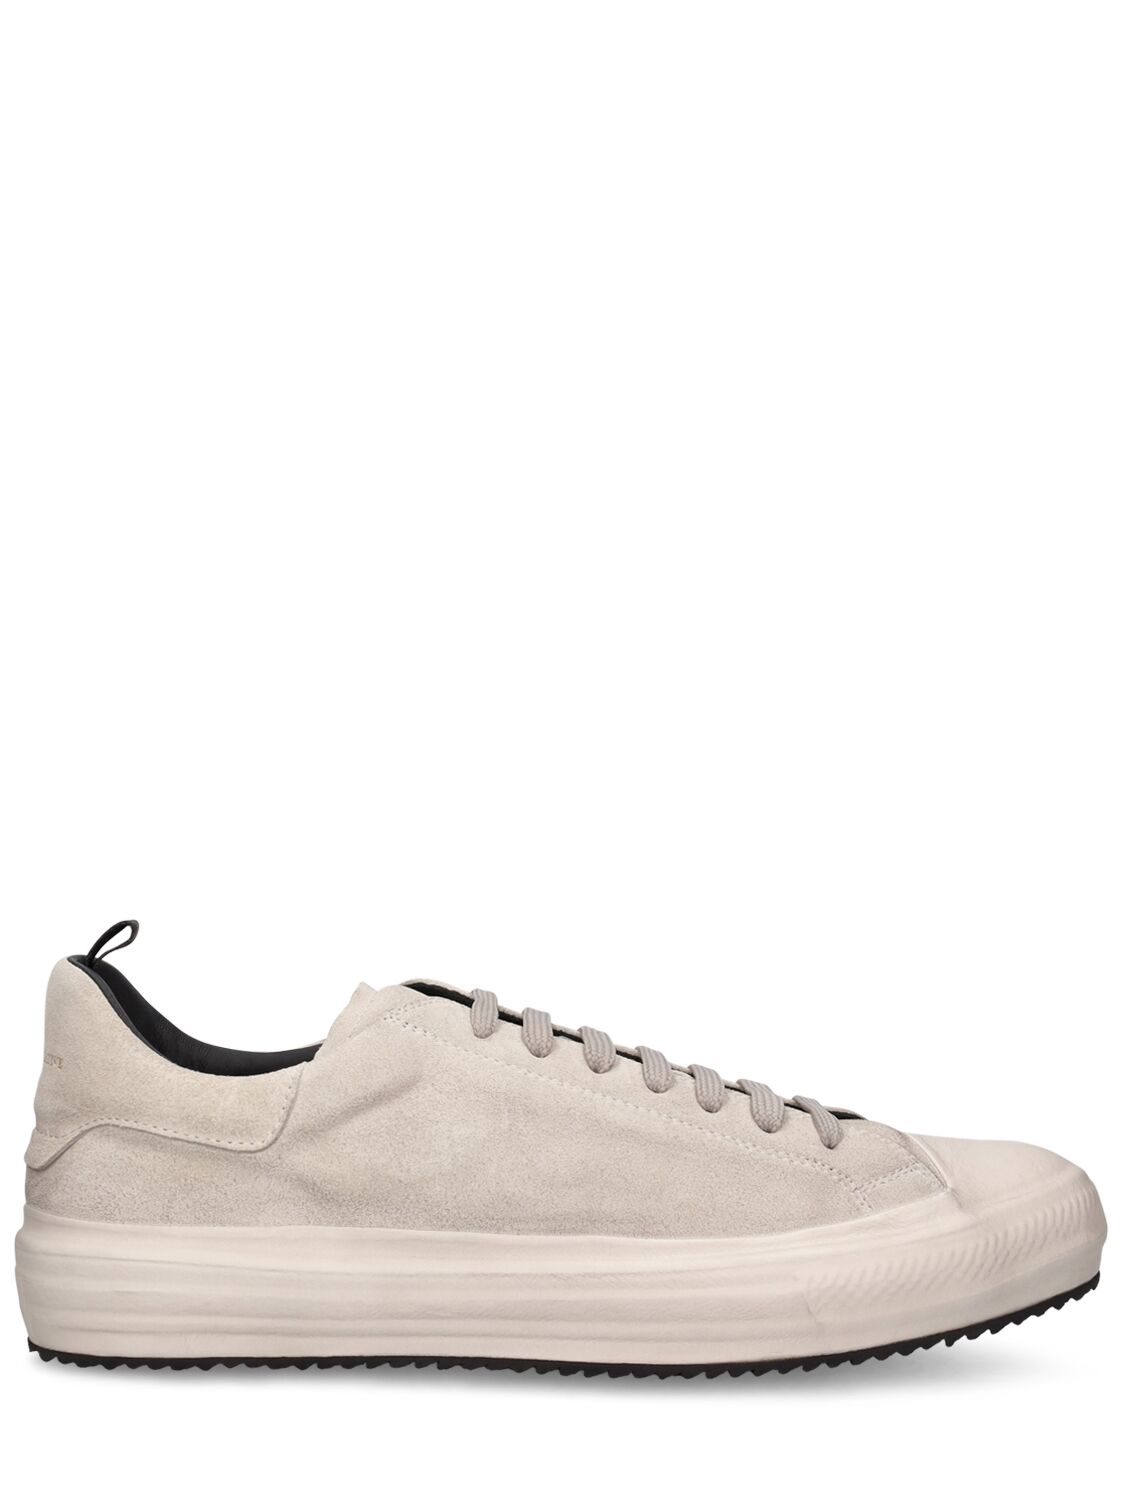 Image of Mes Low Top Sneakers